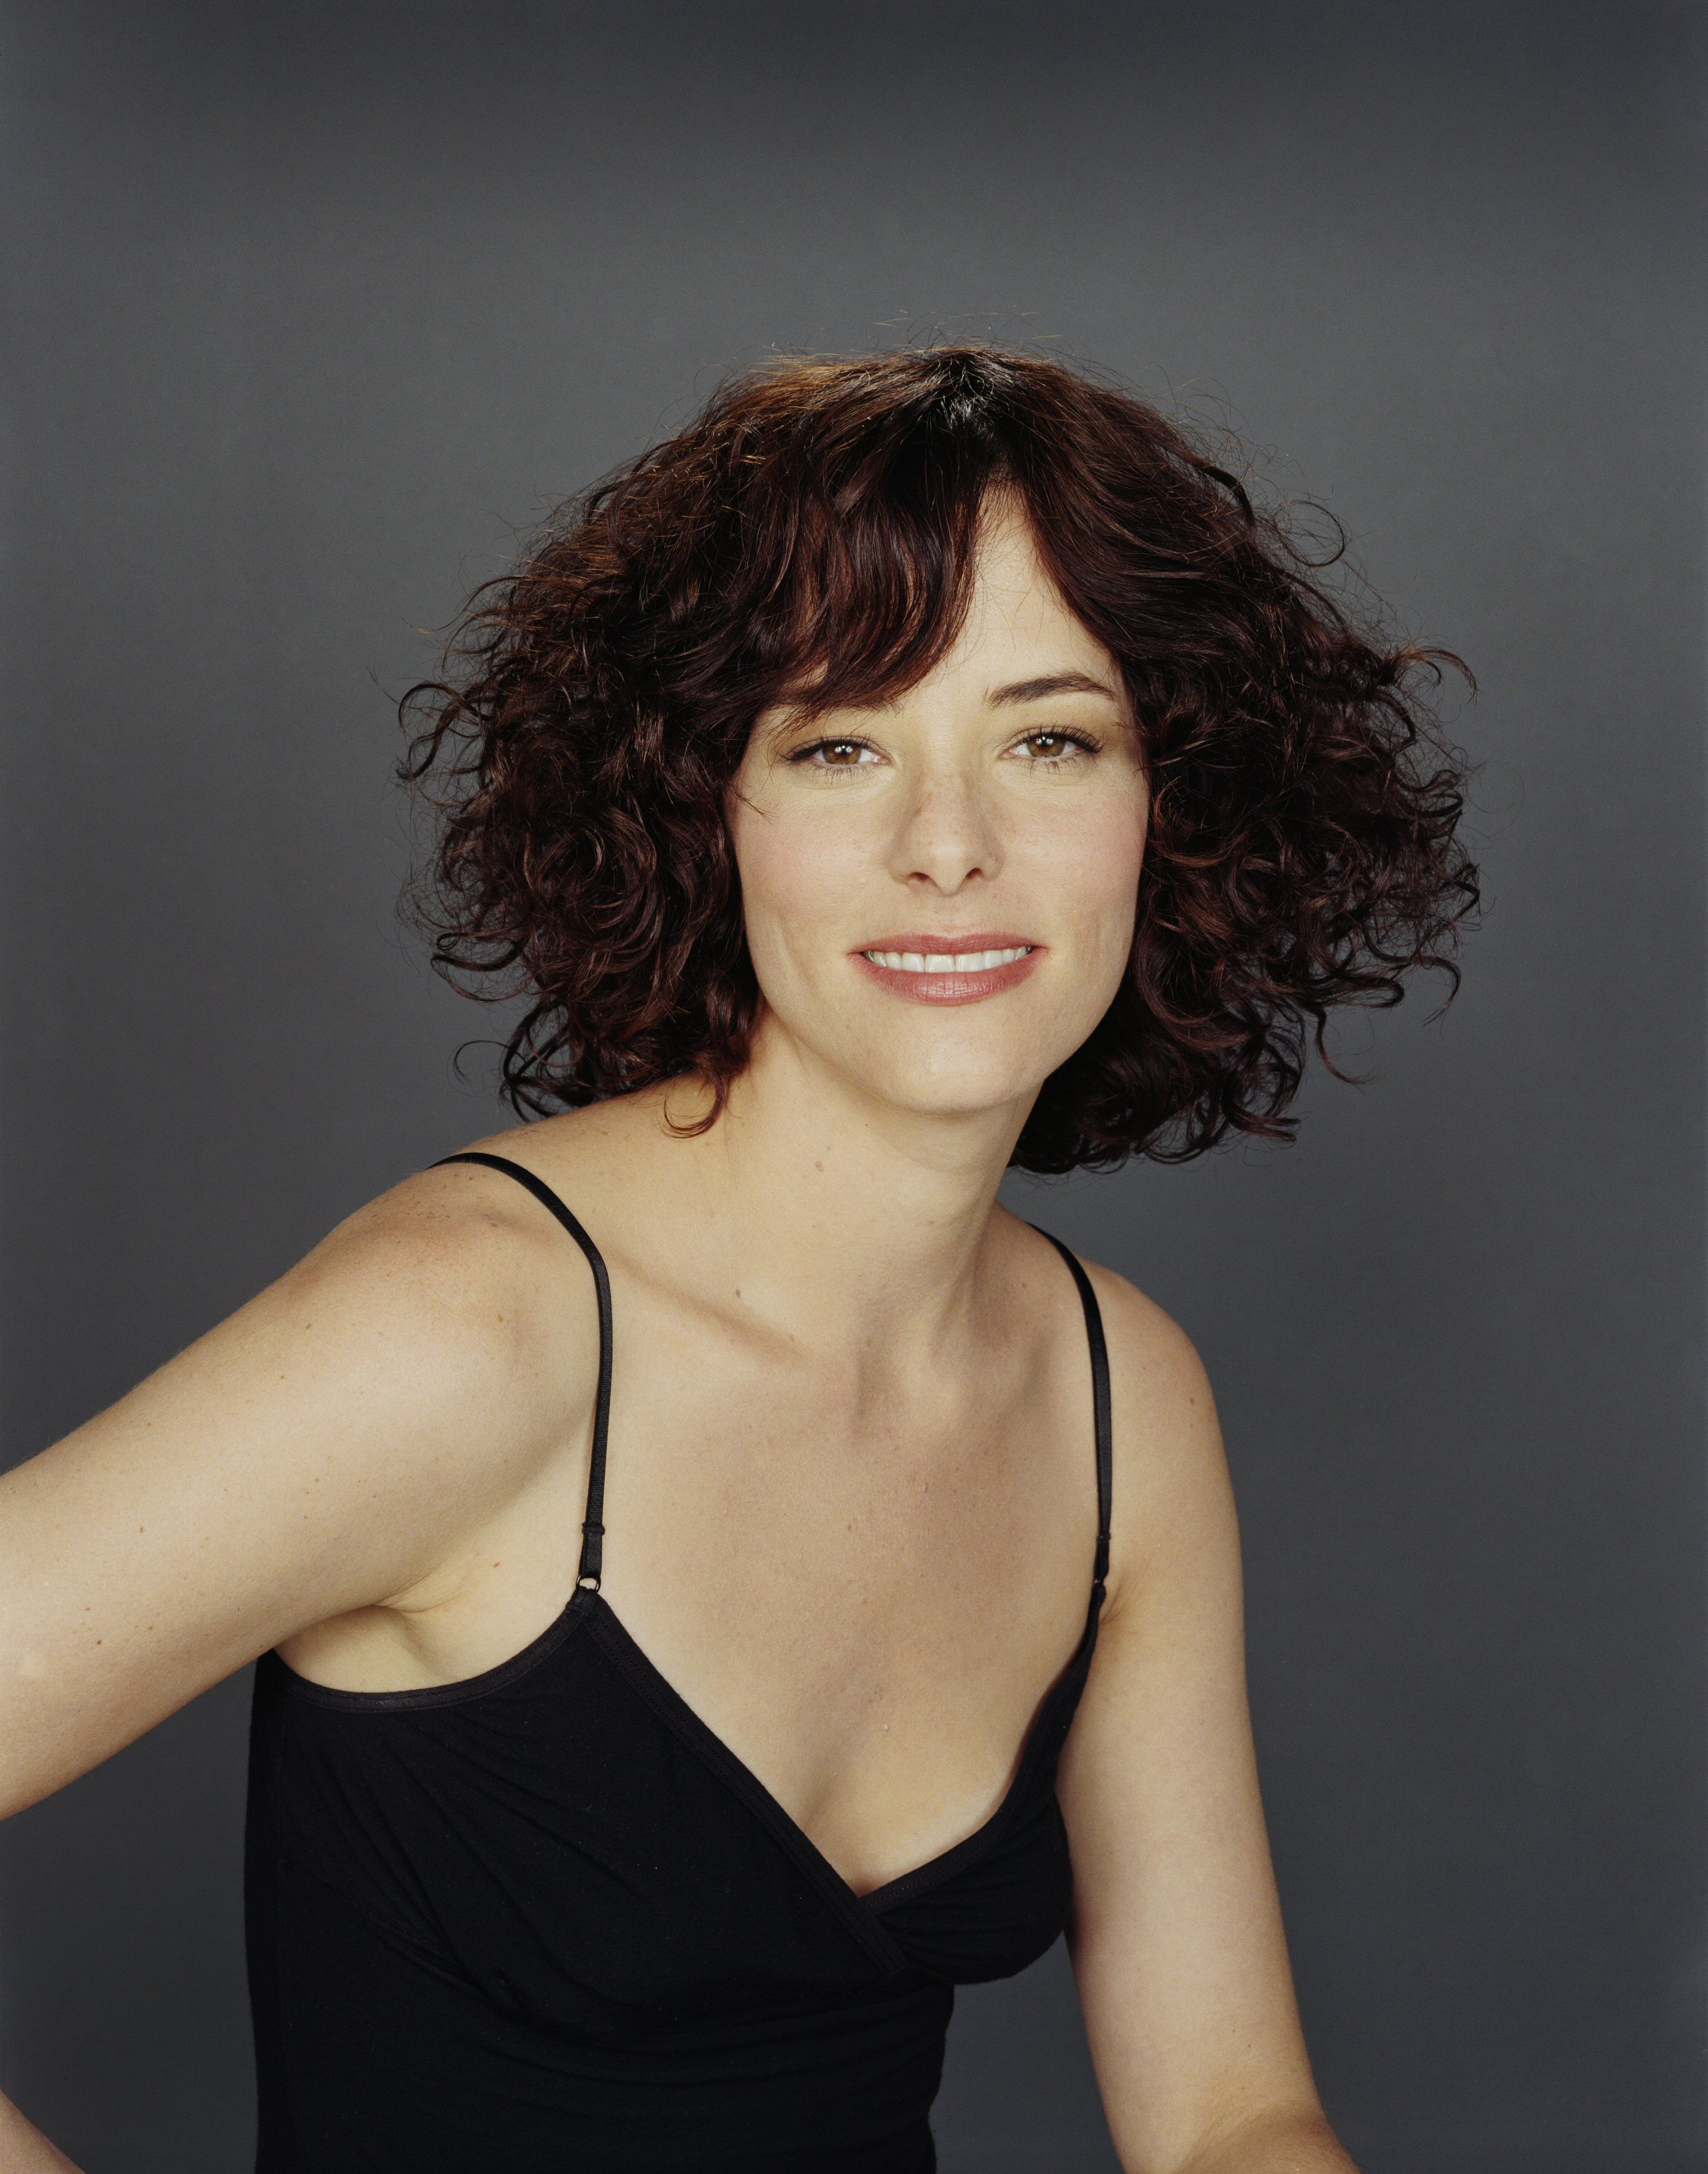 Parker Posey photo 8 of 21 pics, wallpaper - photo #188670 - ThePlace2